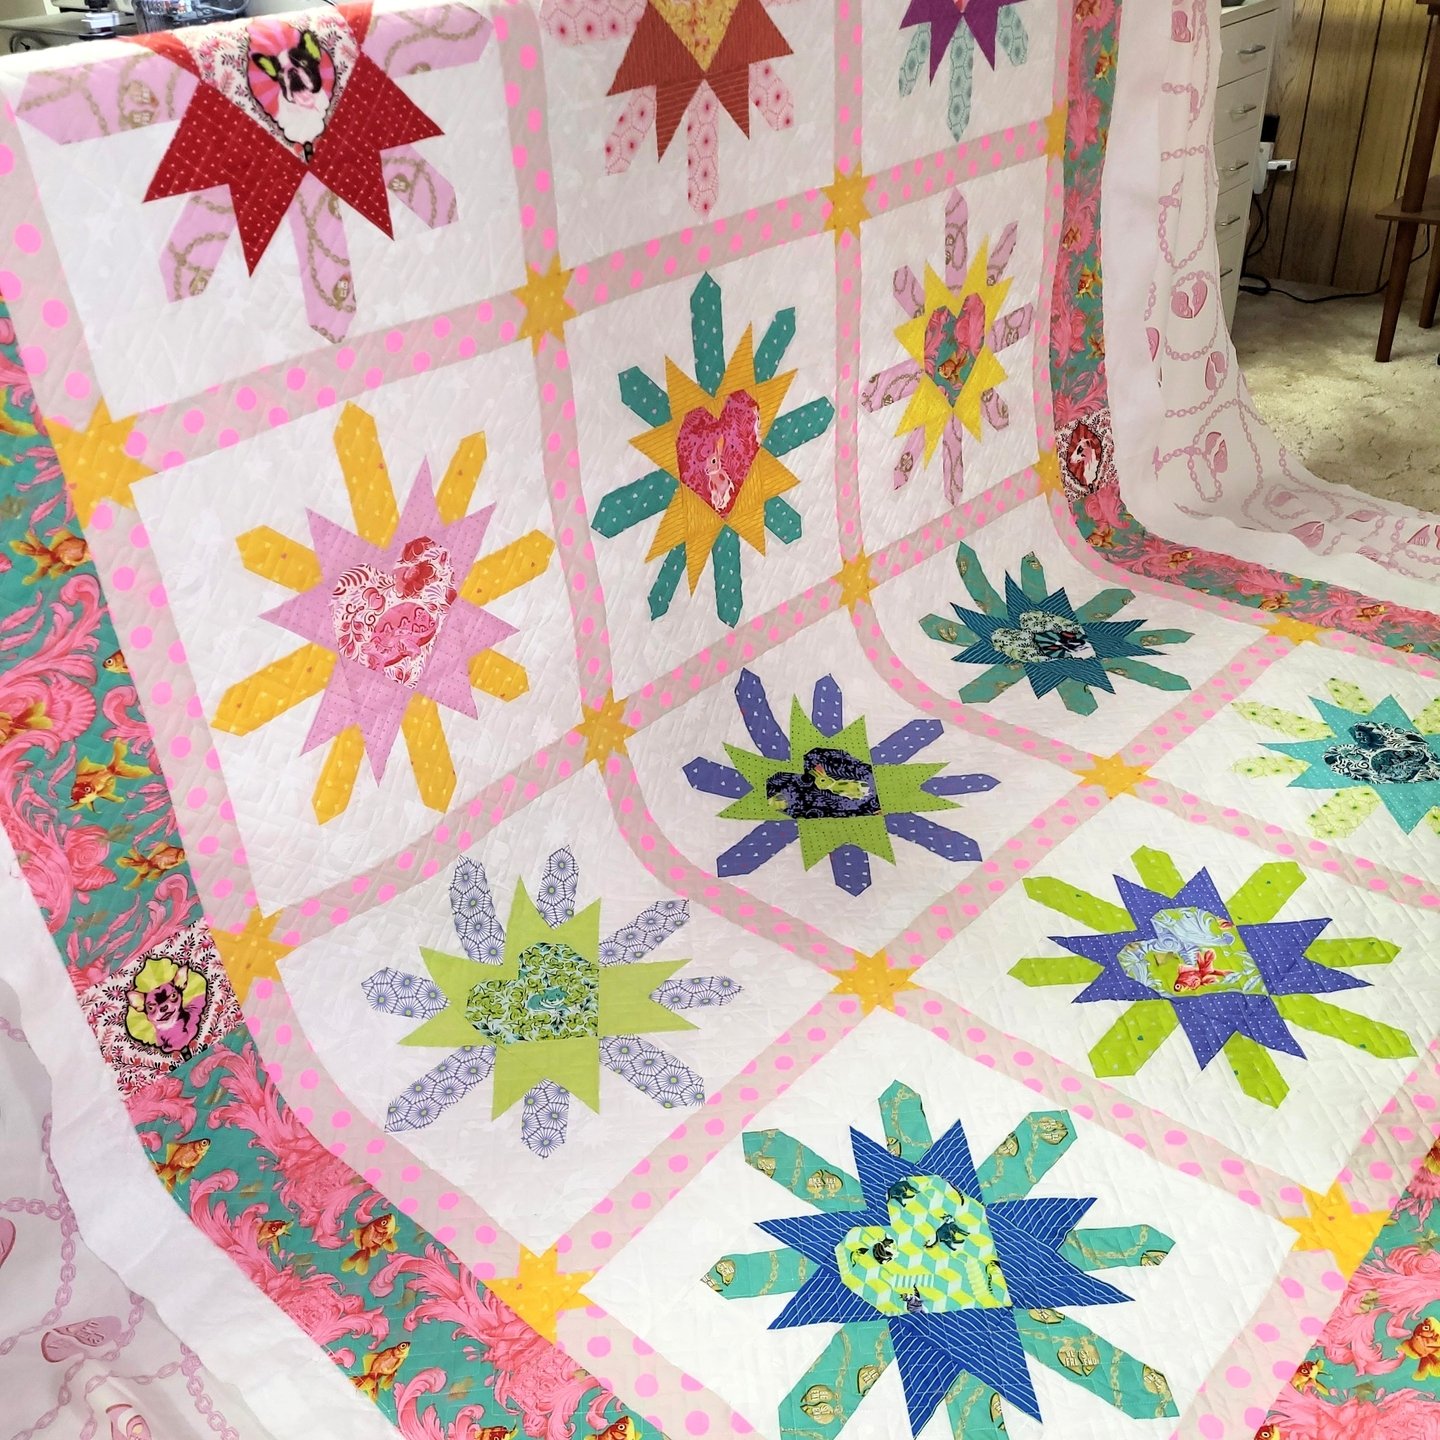 This quilt brought an explosion of color - perfect for spring!

Lisa masterfully pieced this @tulapink quilt featuring Besties fabric and fussy-cut animals!!

It's an amazing quilt!

For the quilting, Lisa chose Two Simple, which was the perfect subt